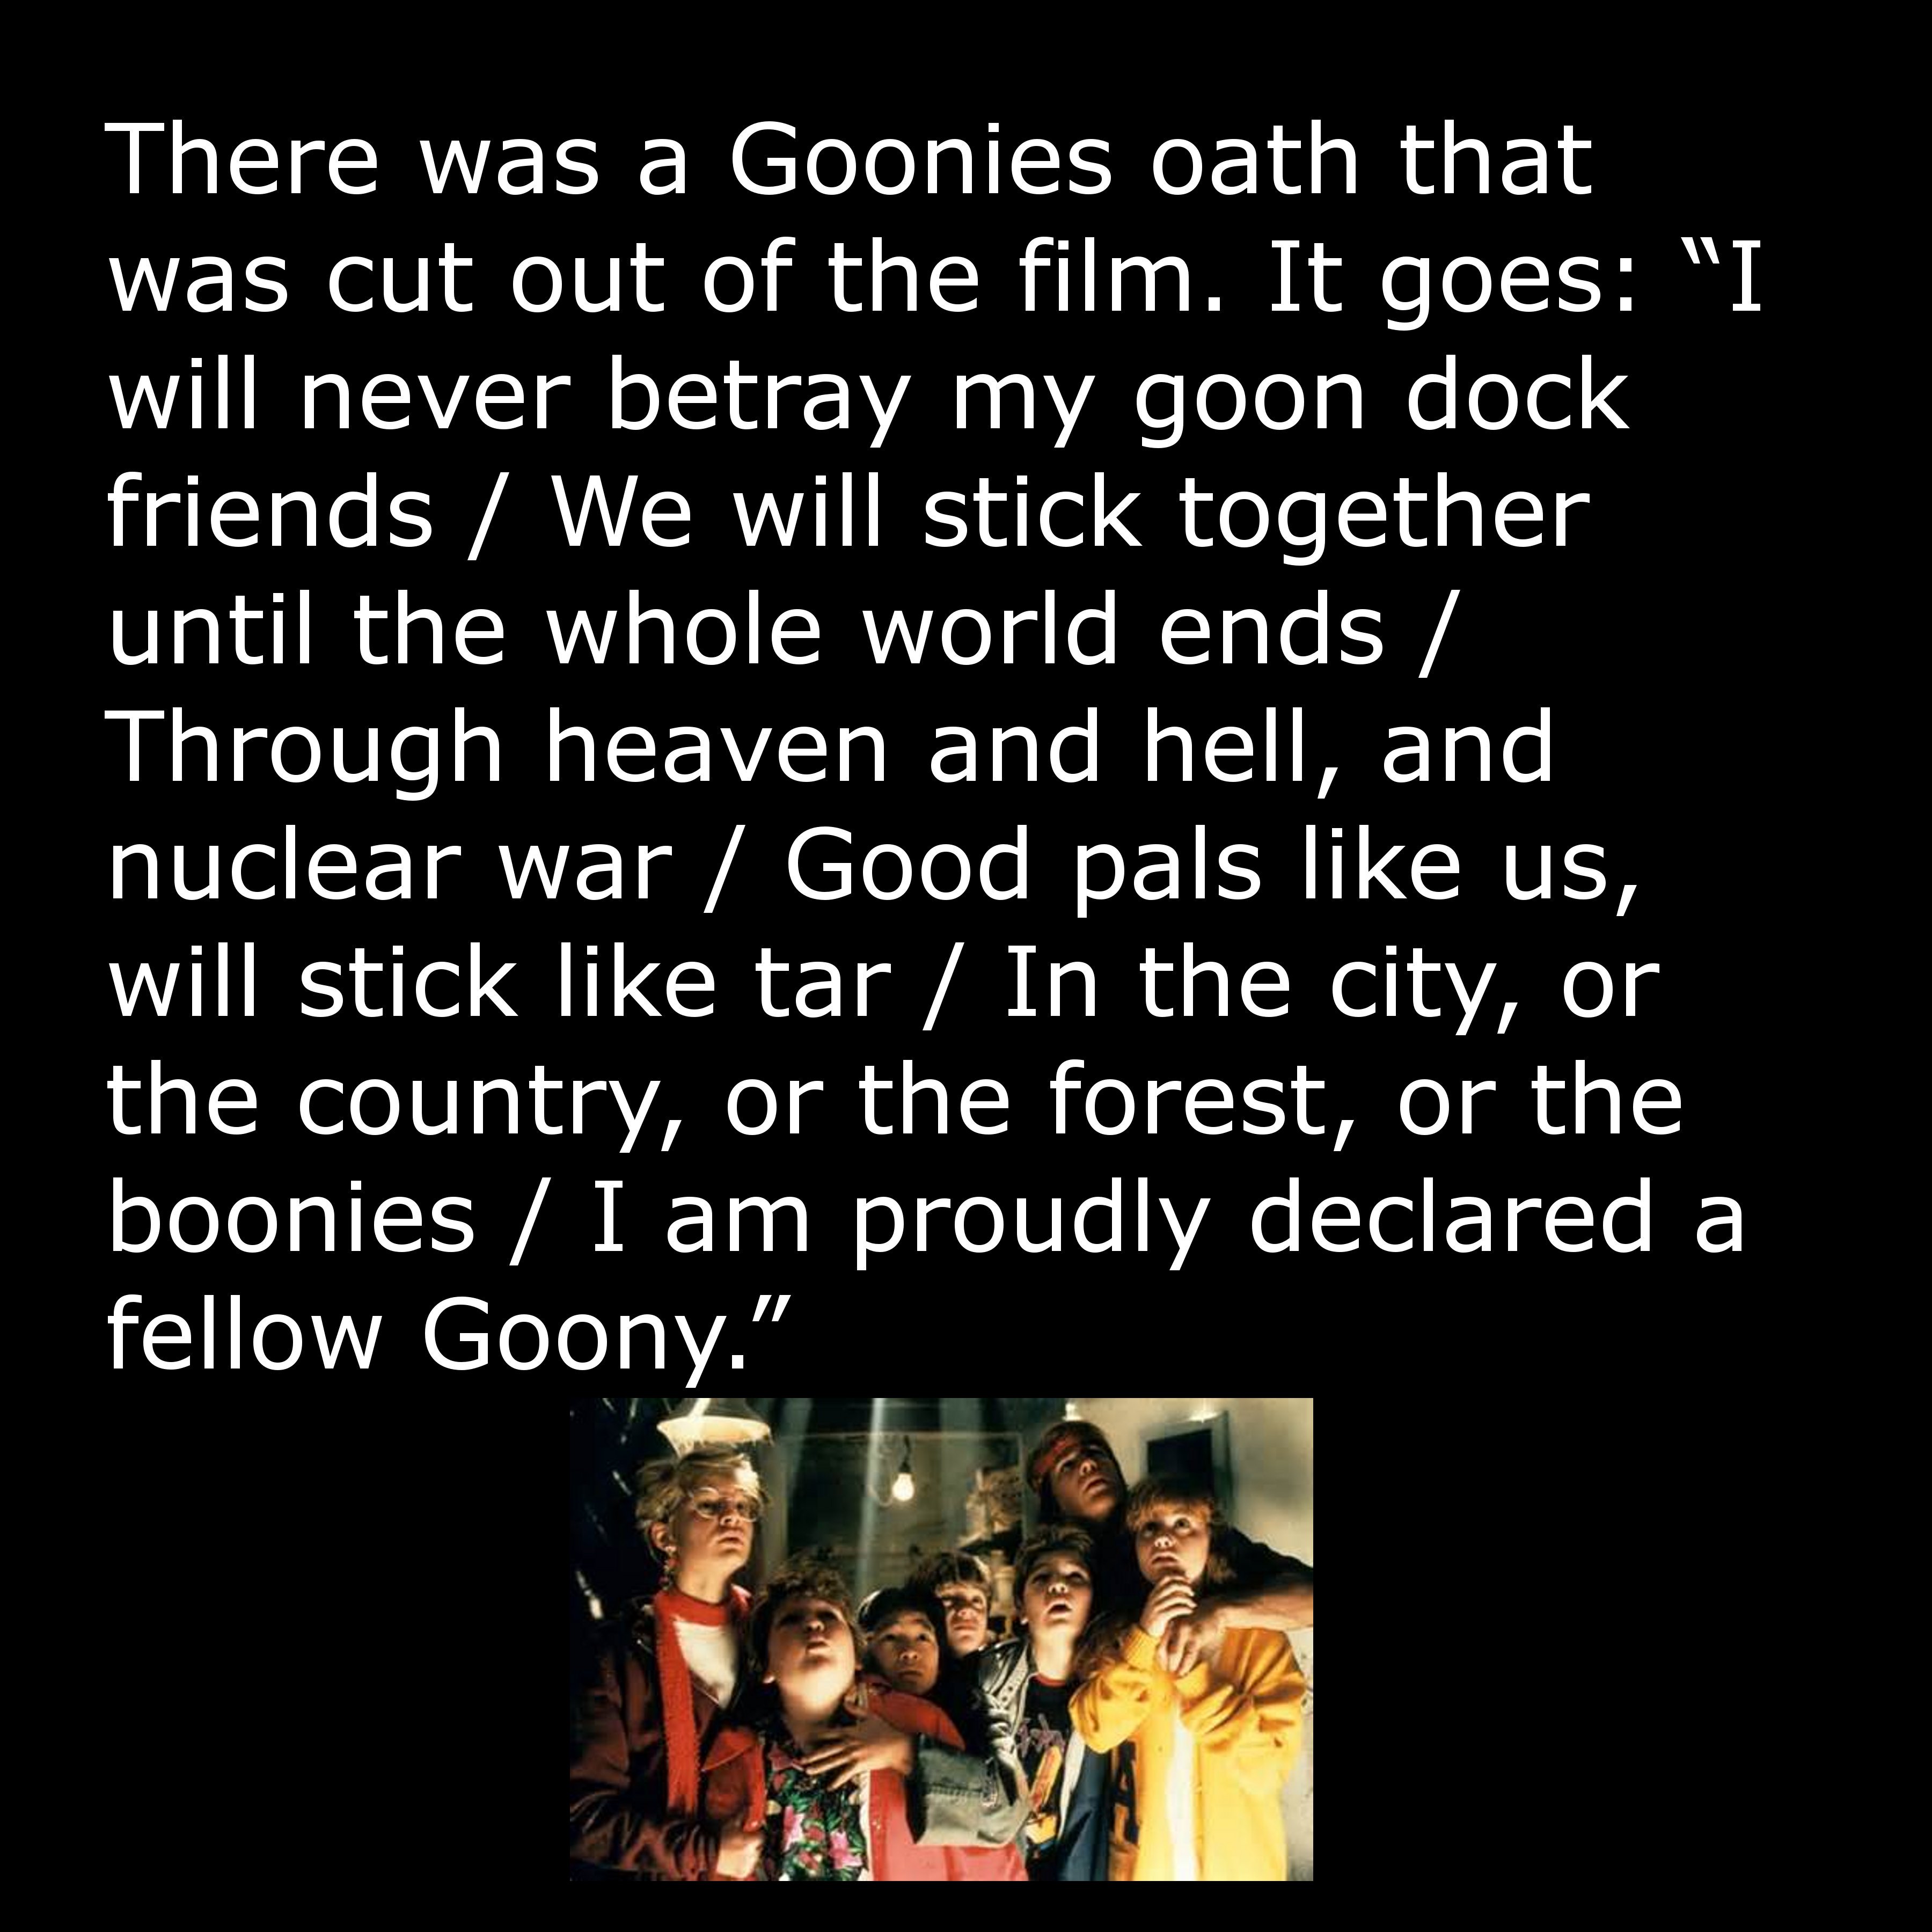 20 Facts For The Goonies' 30th Birthday